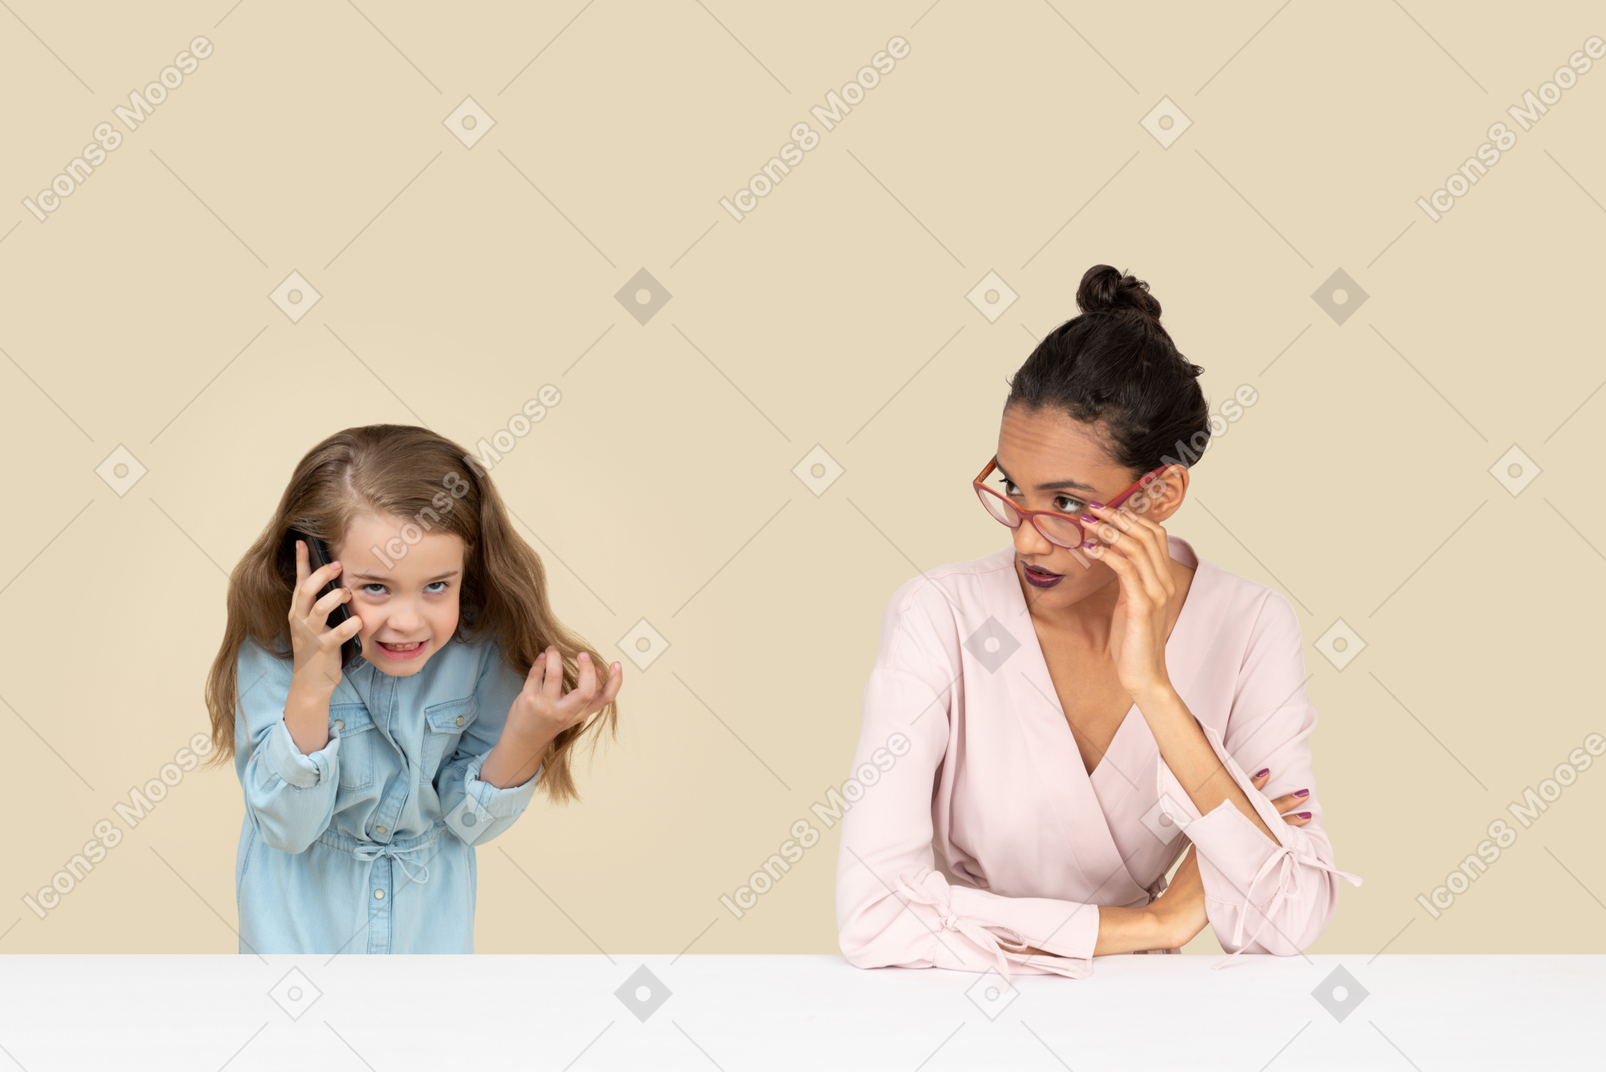 Mom looking attentively at her irritated daughter talking on the phone